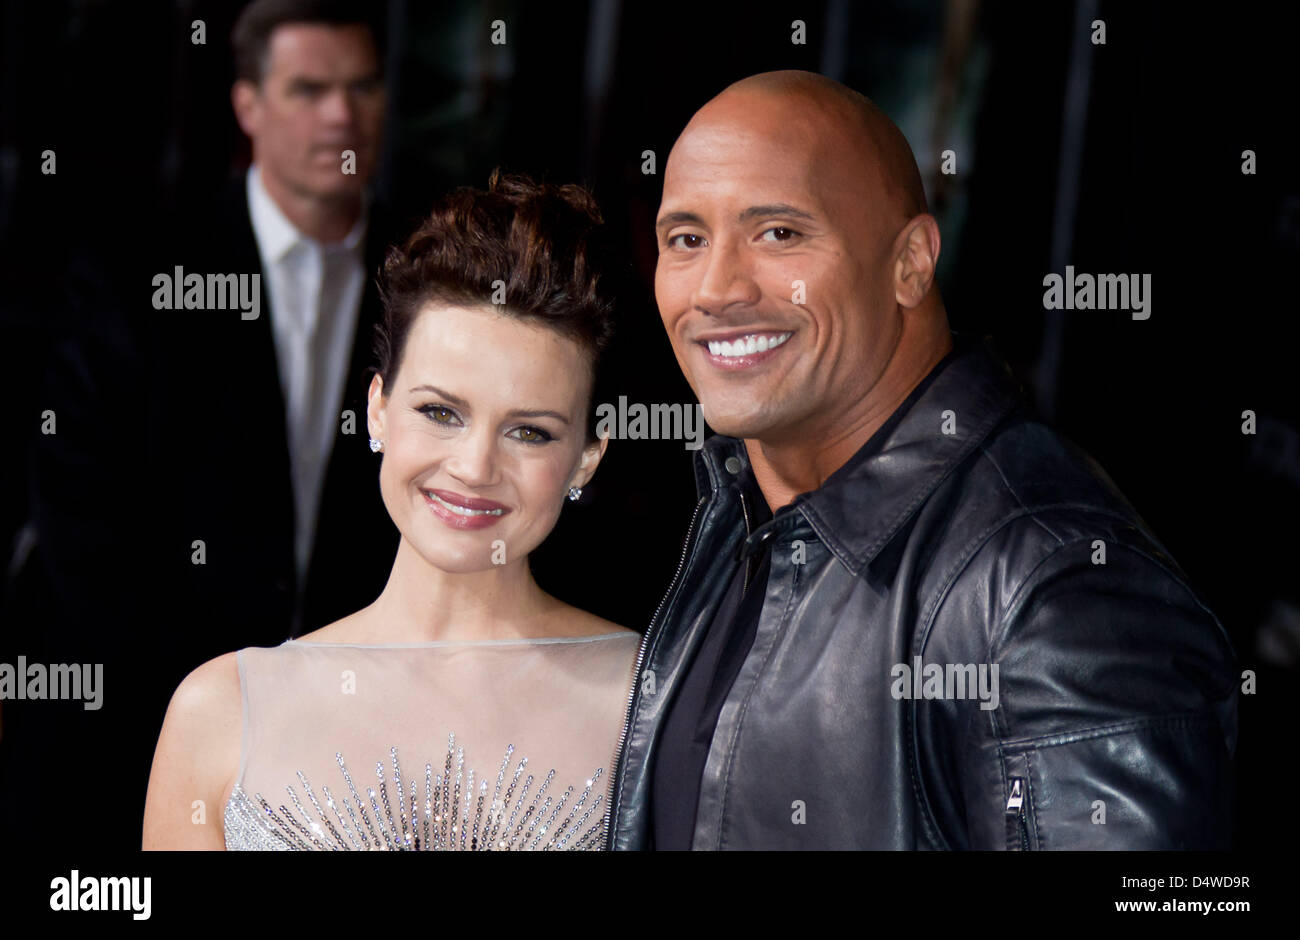 US actress Carla Gugino (L) and US actor  Dwayne 'The Rock' Johnson attend the premiere of the film 'Faster' at Grauman's Chinese Theatre in Los Angeles, USA, 22 November 2010. Photo: Hubert Boesl Stock Photo